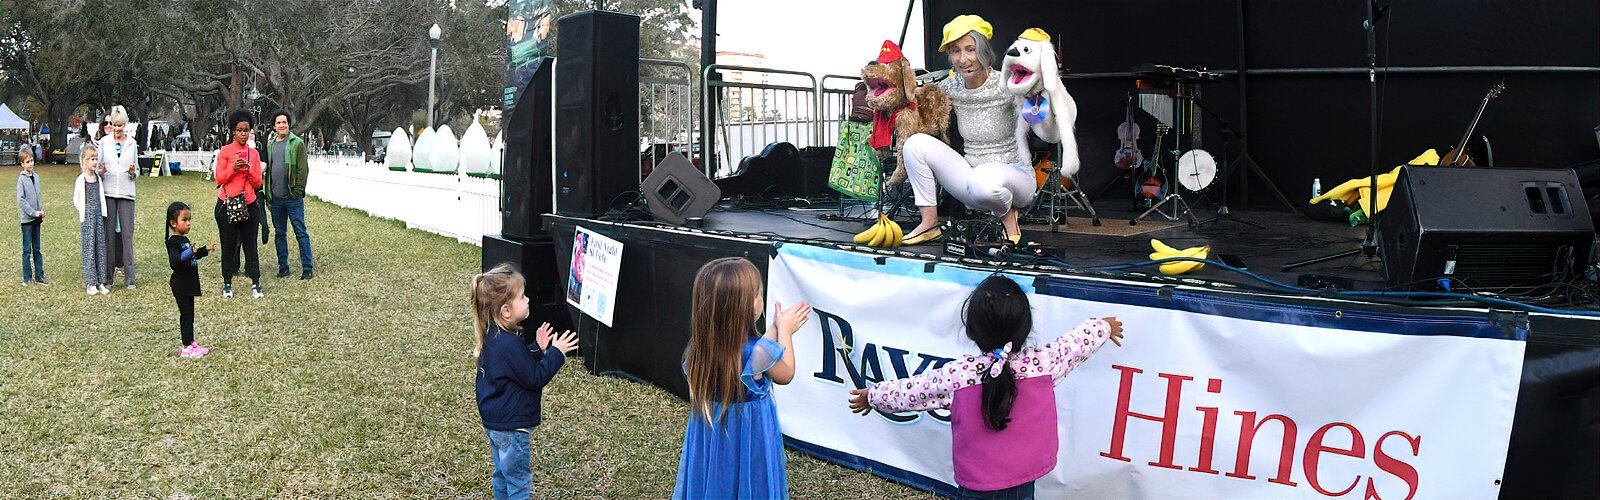 Children’s “edutainer” Shana Banana entertains young children with her puppets at First Night St Petersburg, the largest family-friendly New Year’s Eve celebration of the arts in Florida.